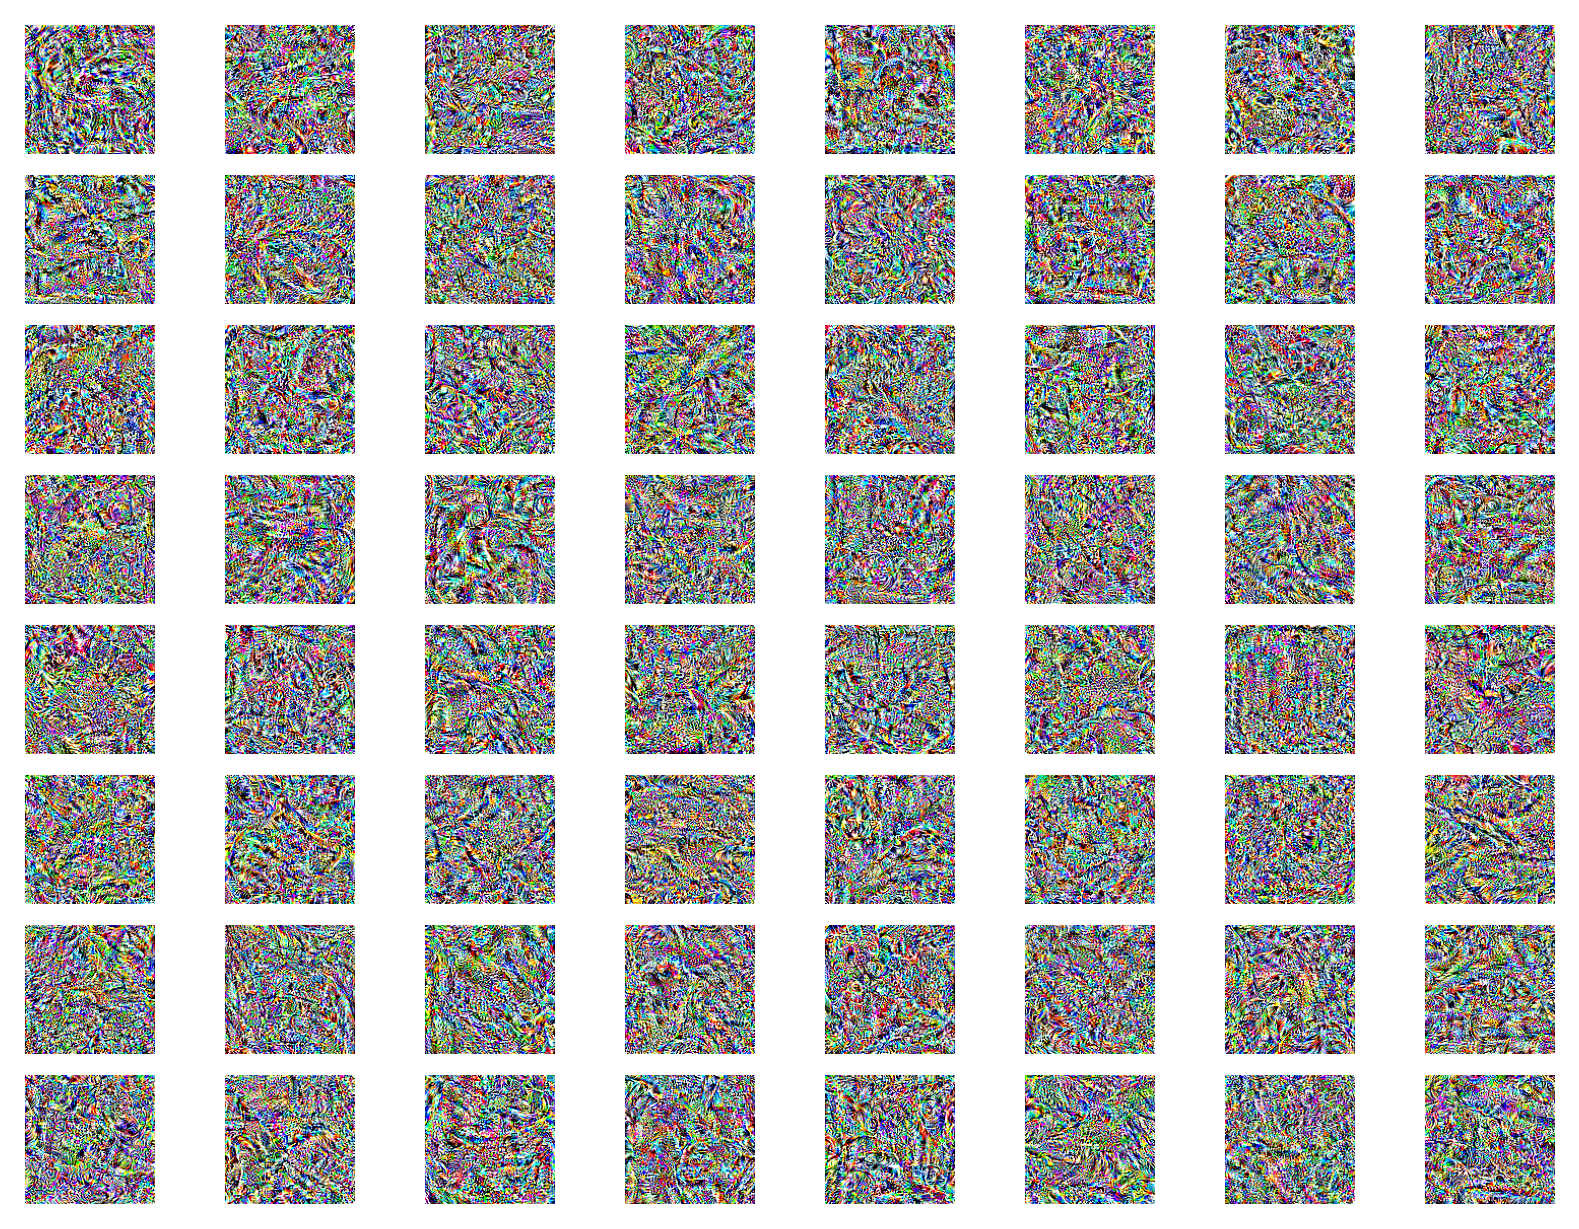 A lot of bright colourful images of varying patterns. I can't really explain it.